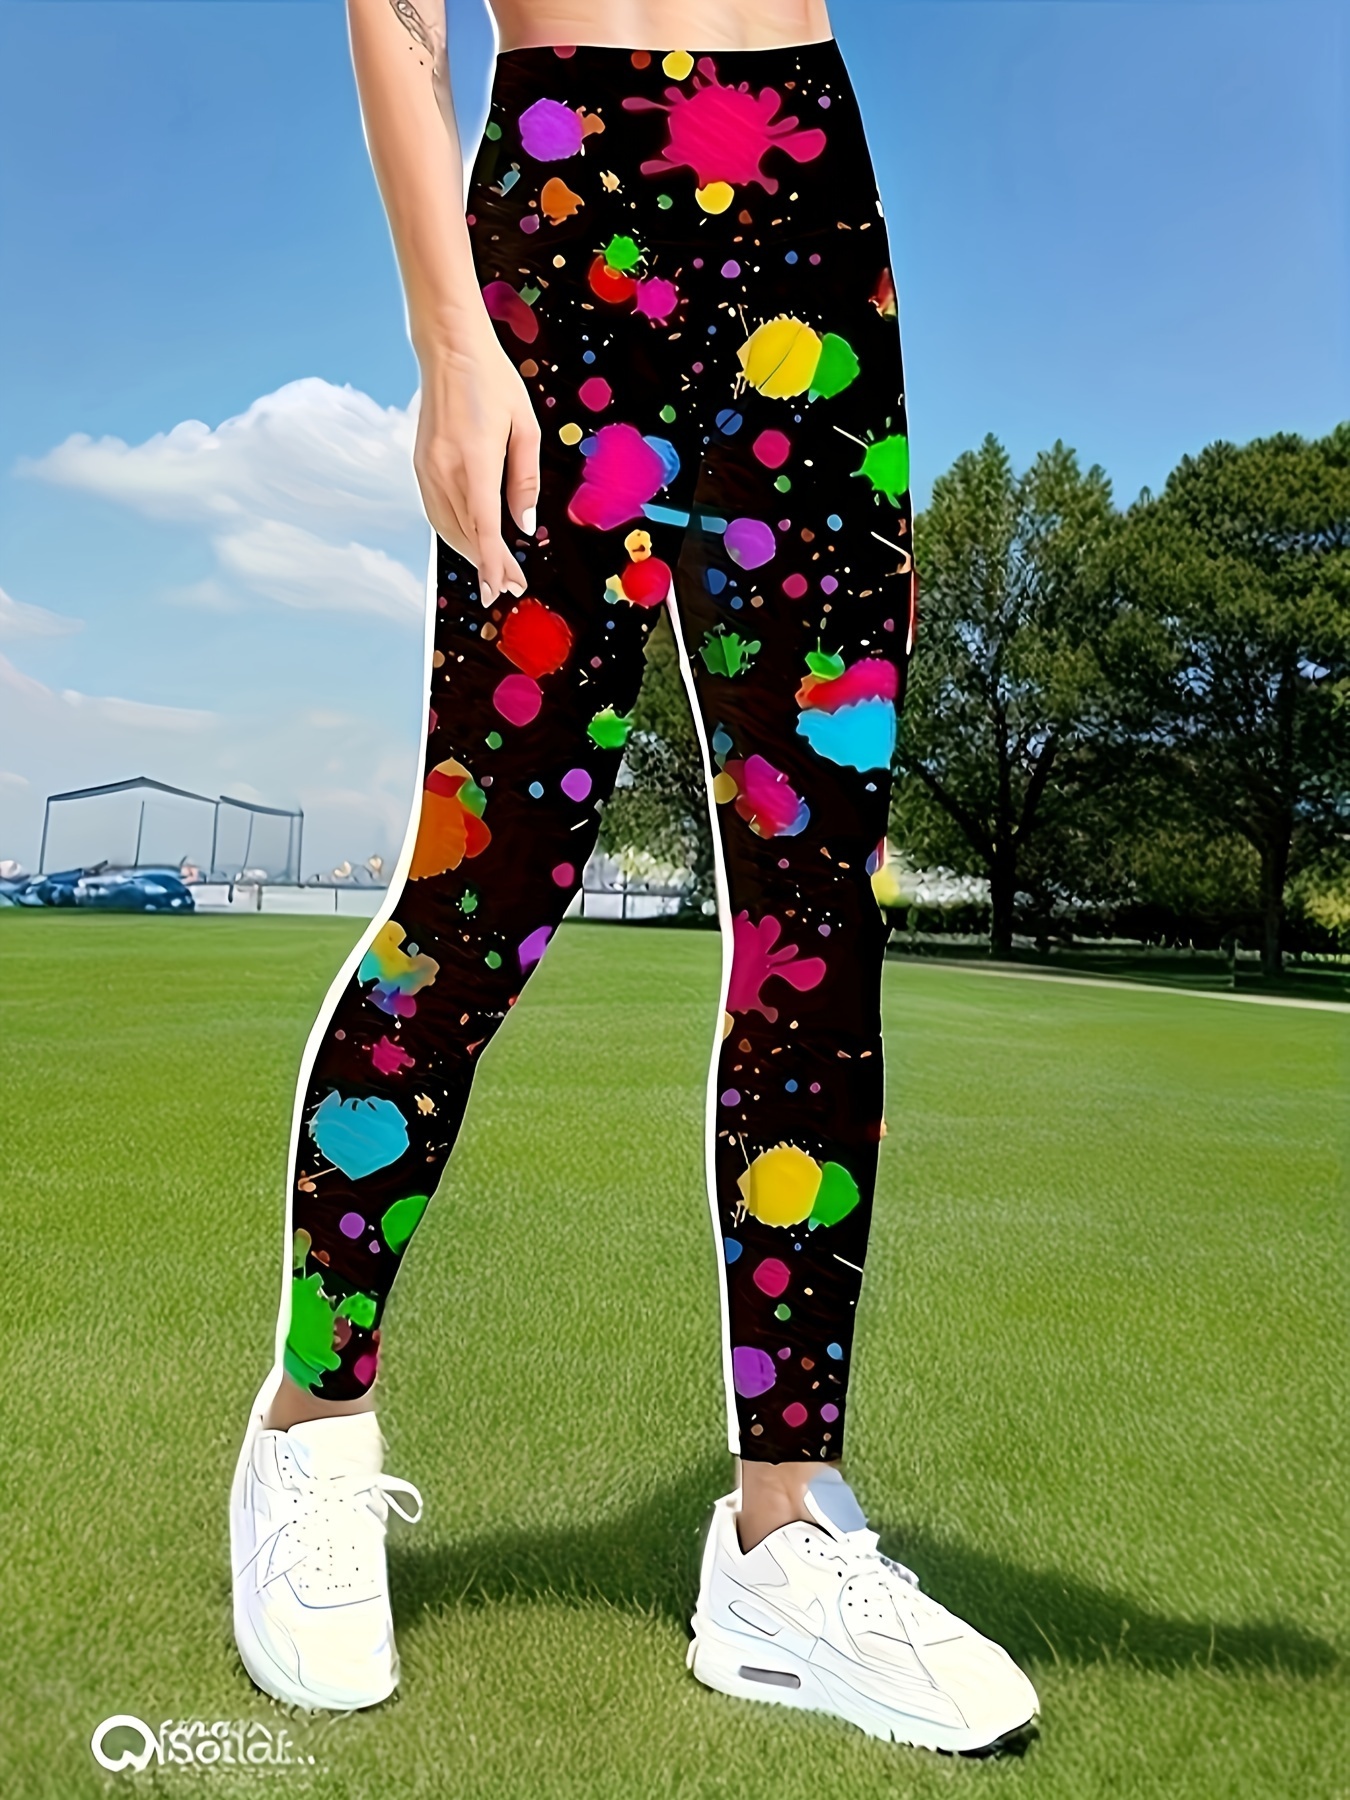 Step Up Your Figure Skating Game with Jivsport's Leggings in Switzerland”, by Jivsport